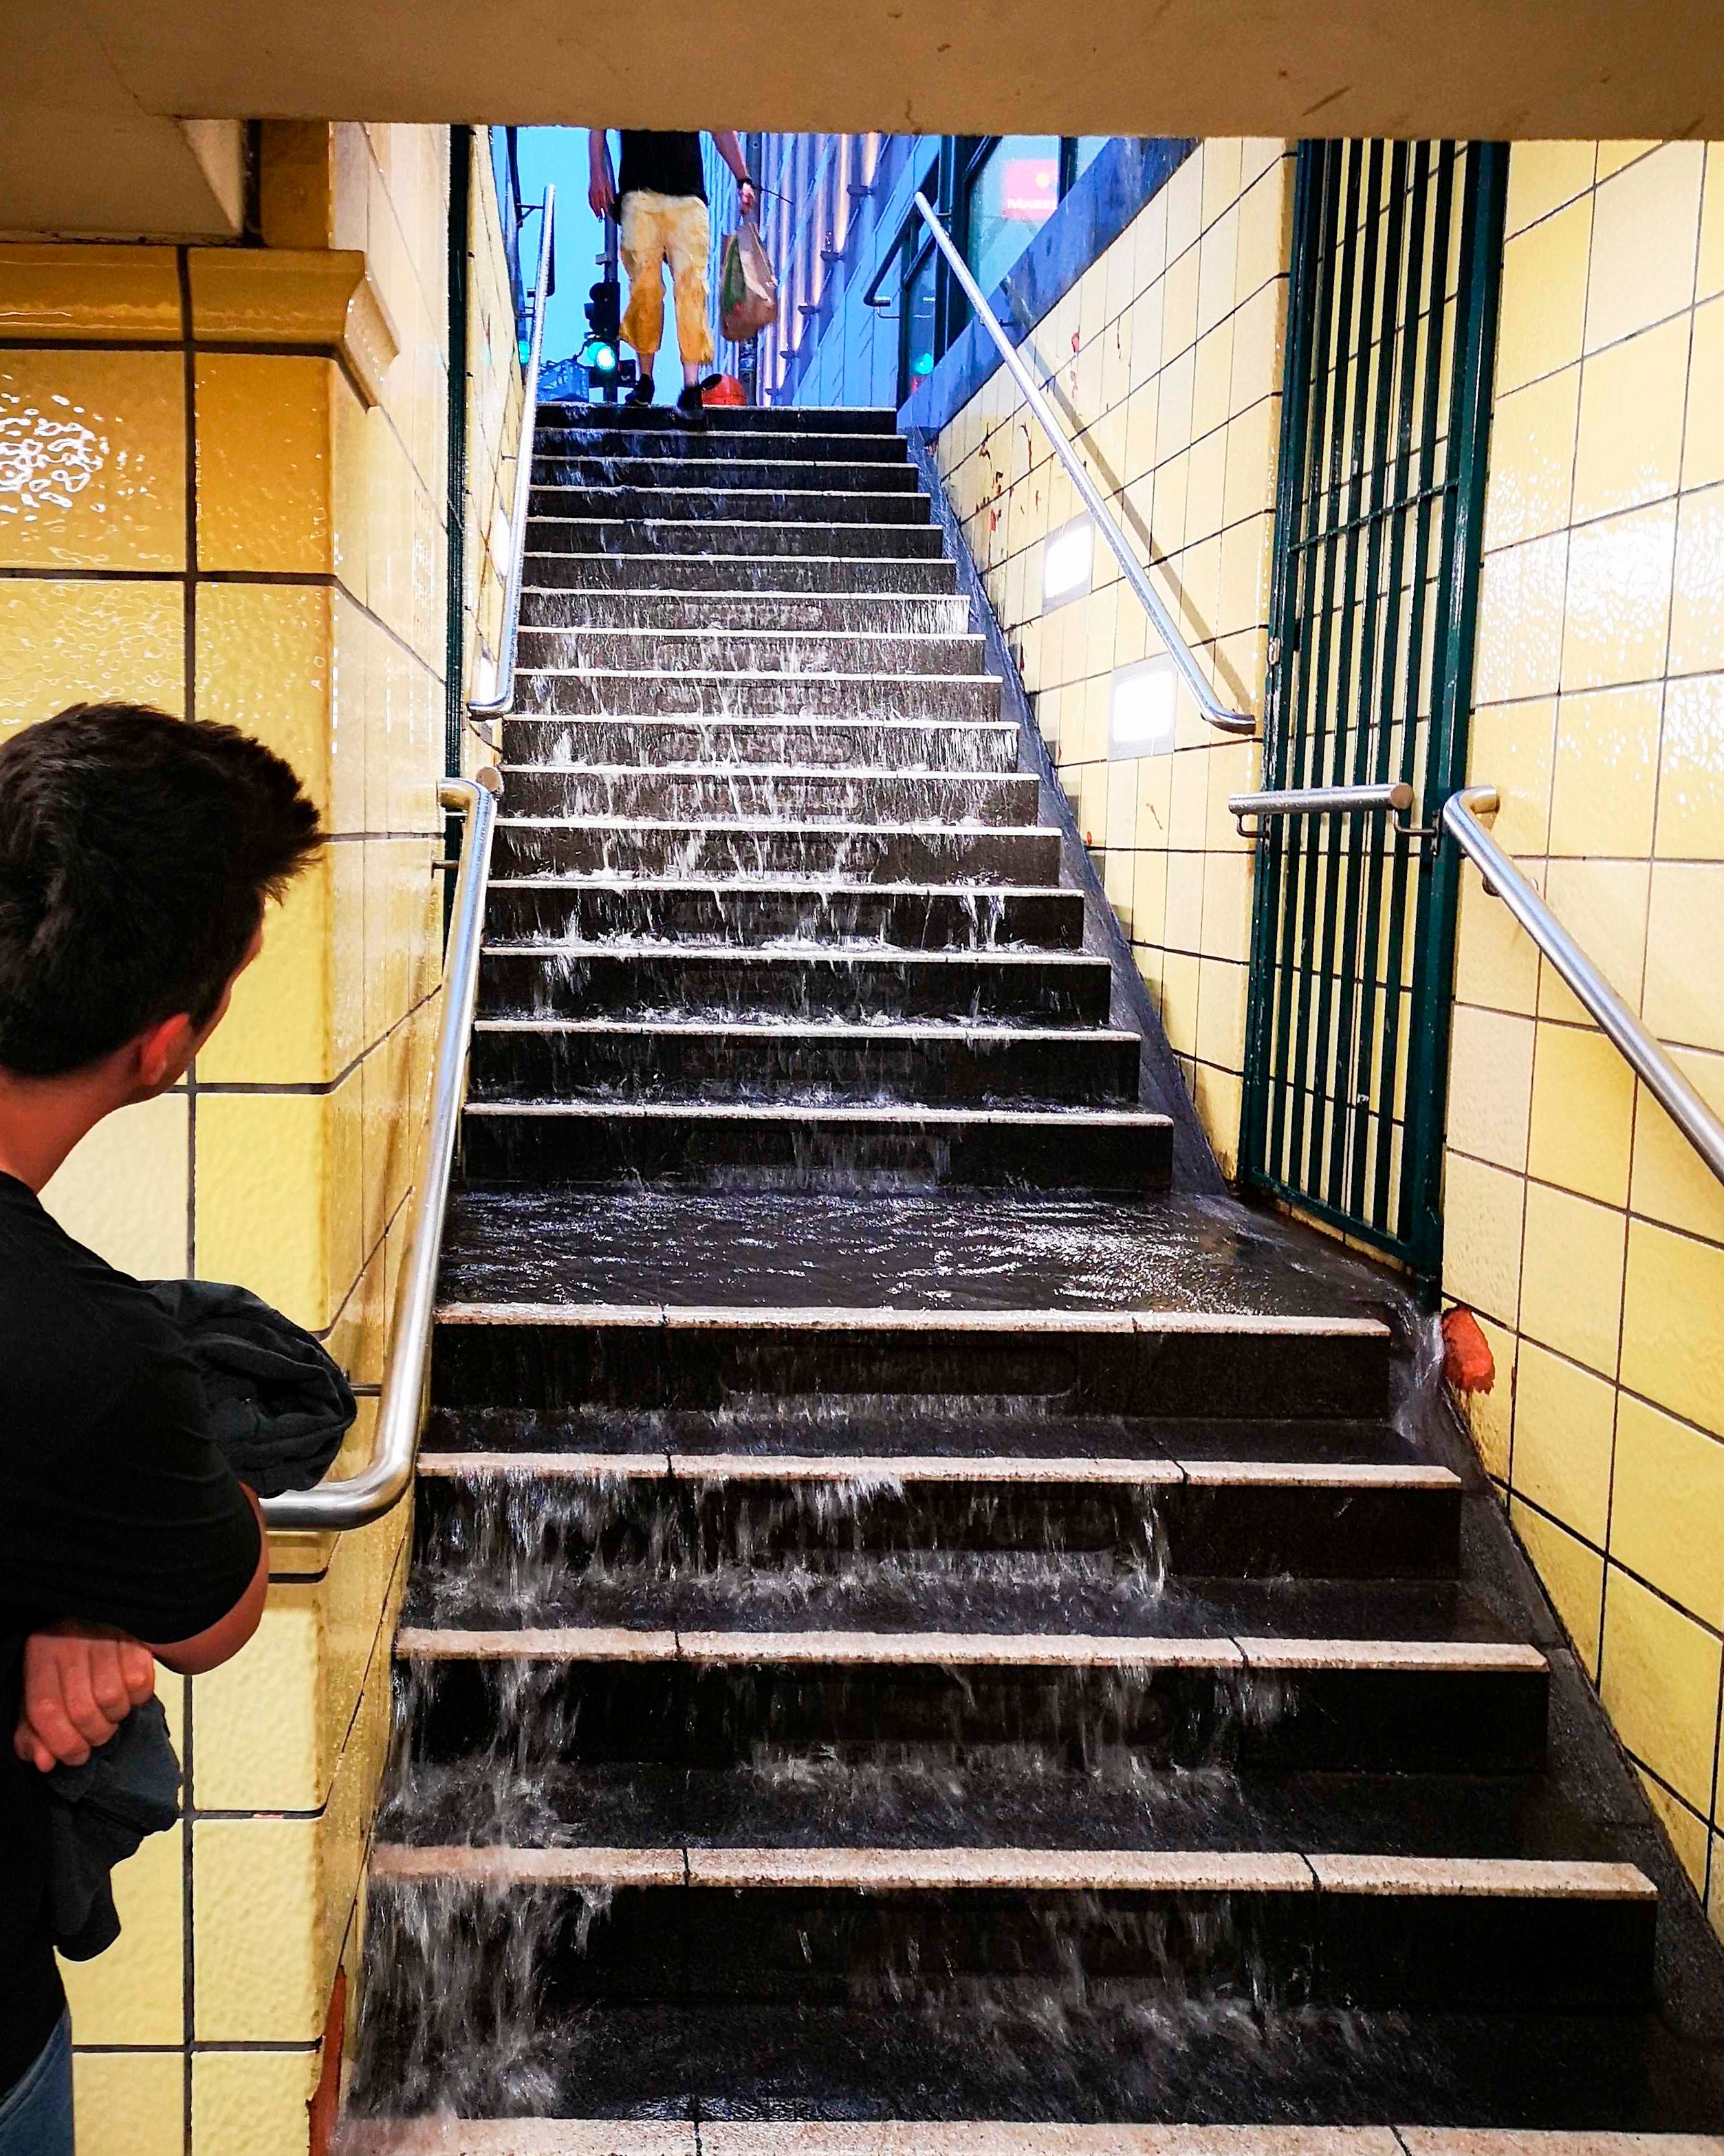 After heavy rainfall, water runs down the steps to the subway at Berlin Friedrichstra'e station. (Photo: Fabian Fuchs, AP)